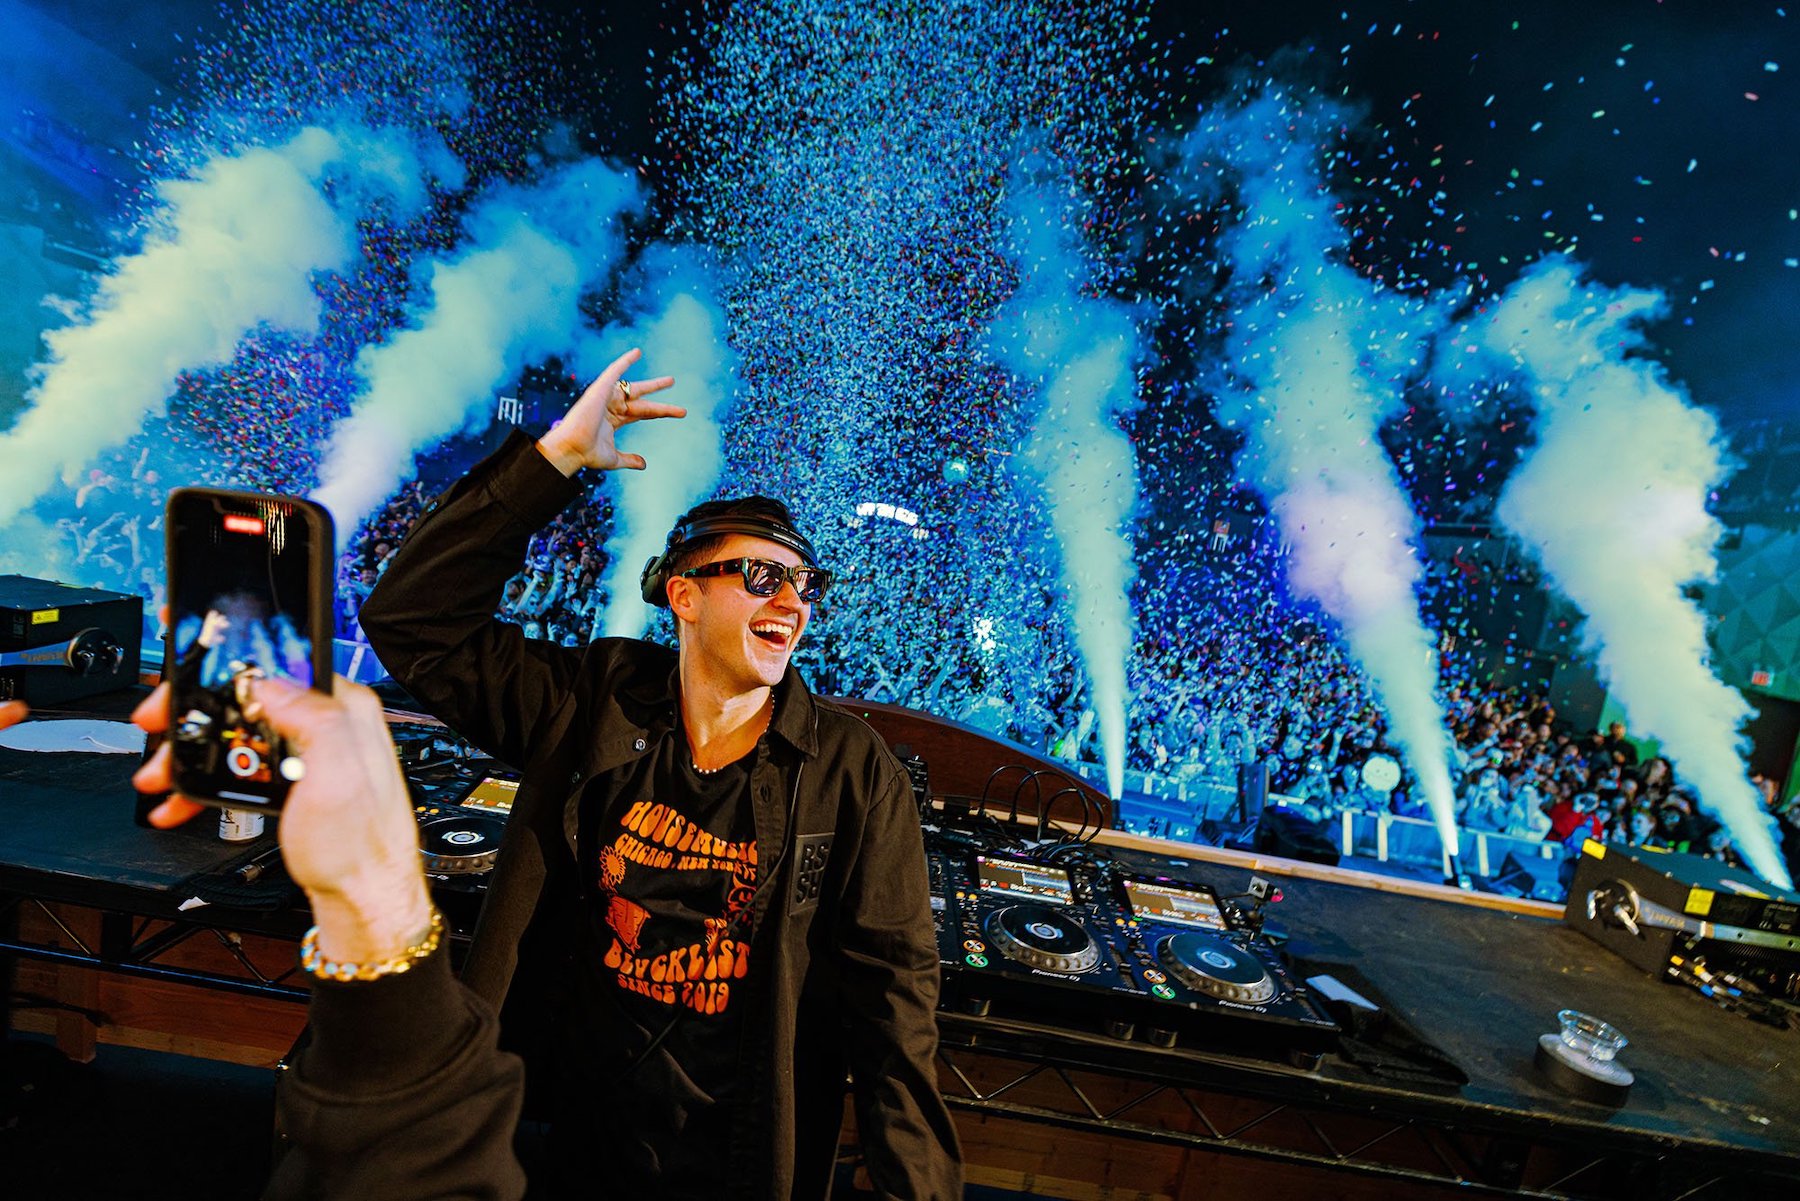 John Summit in a black jacket and black sunglasses standing in a DJ booth with confetti cannons and fog machines in blue light